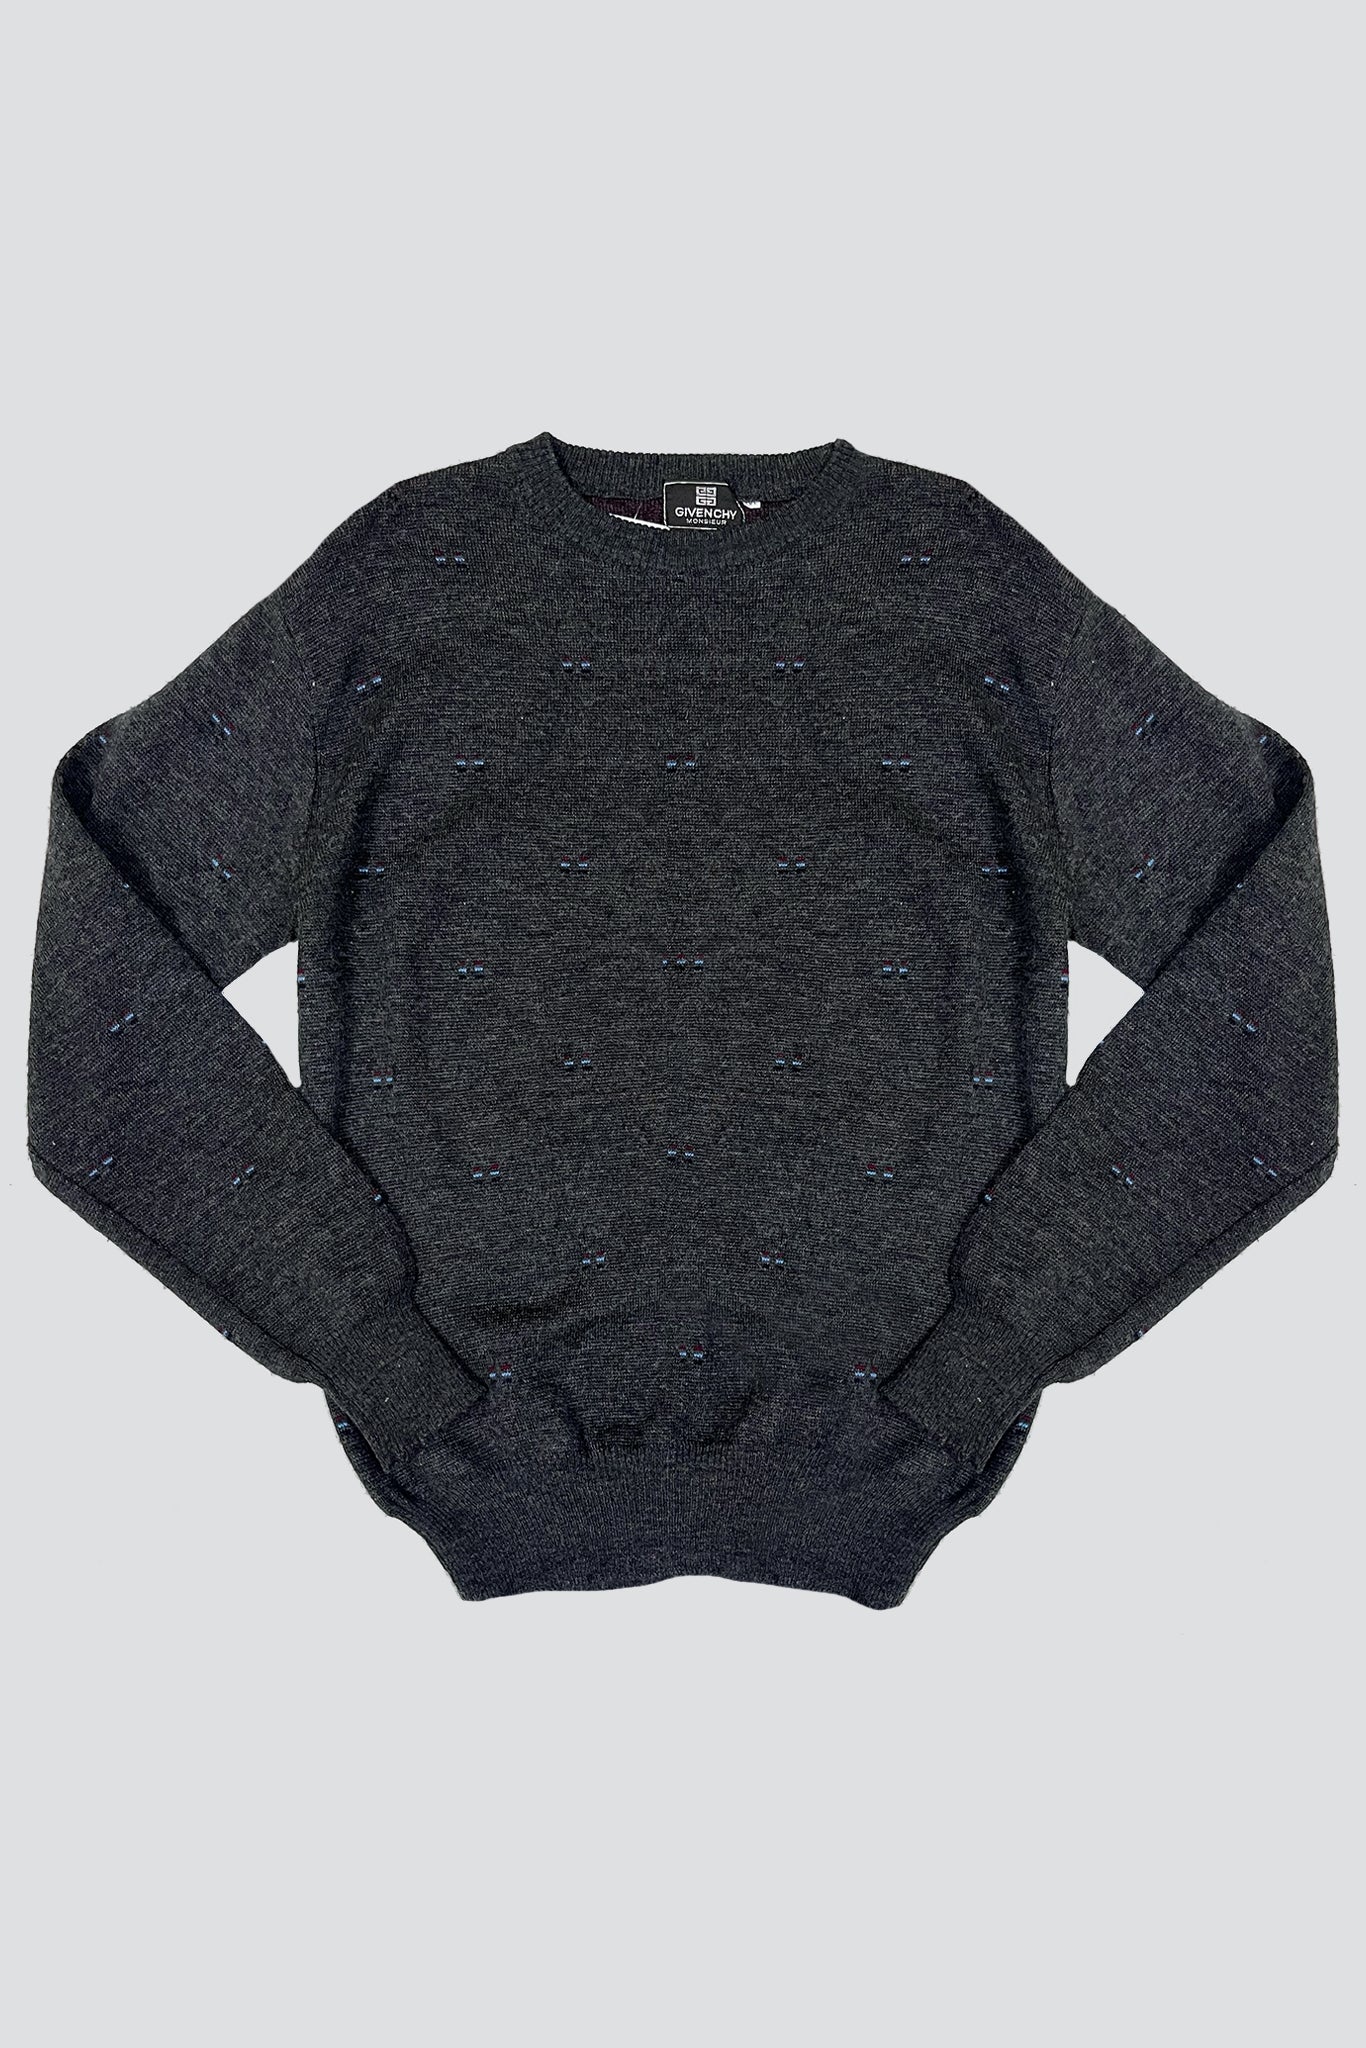 Givenchy Charcoal Stitch Pullover